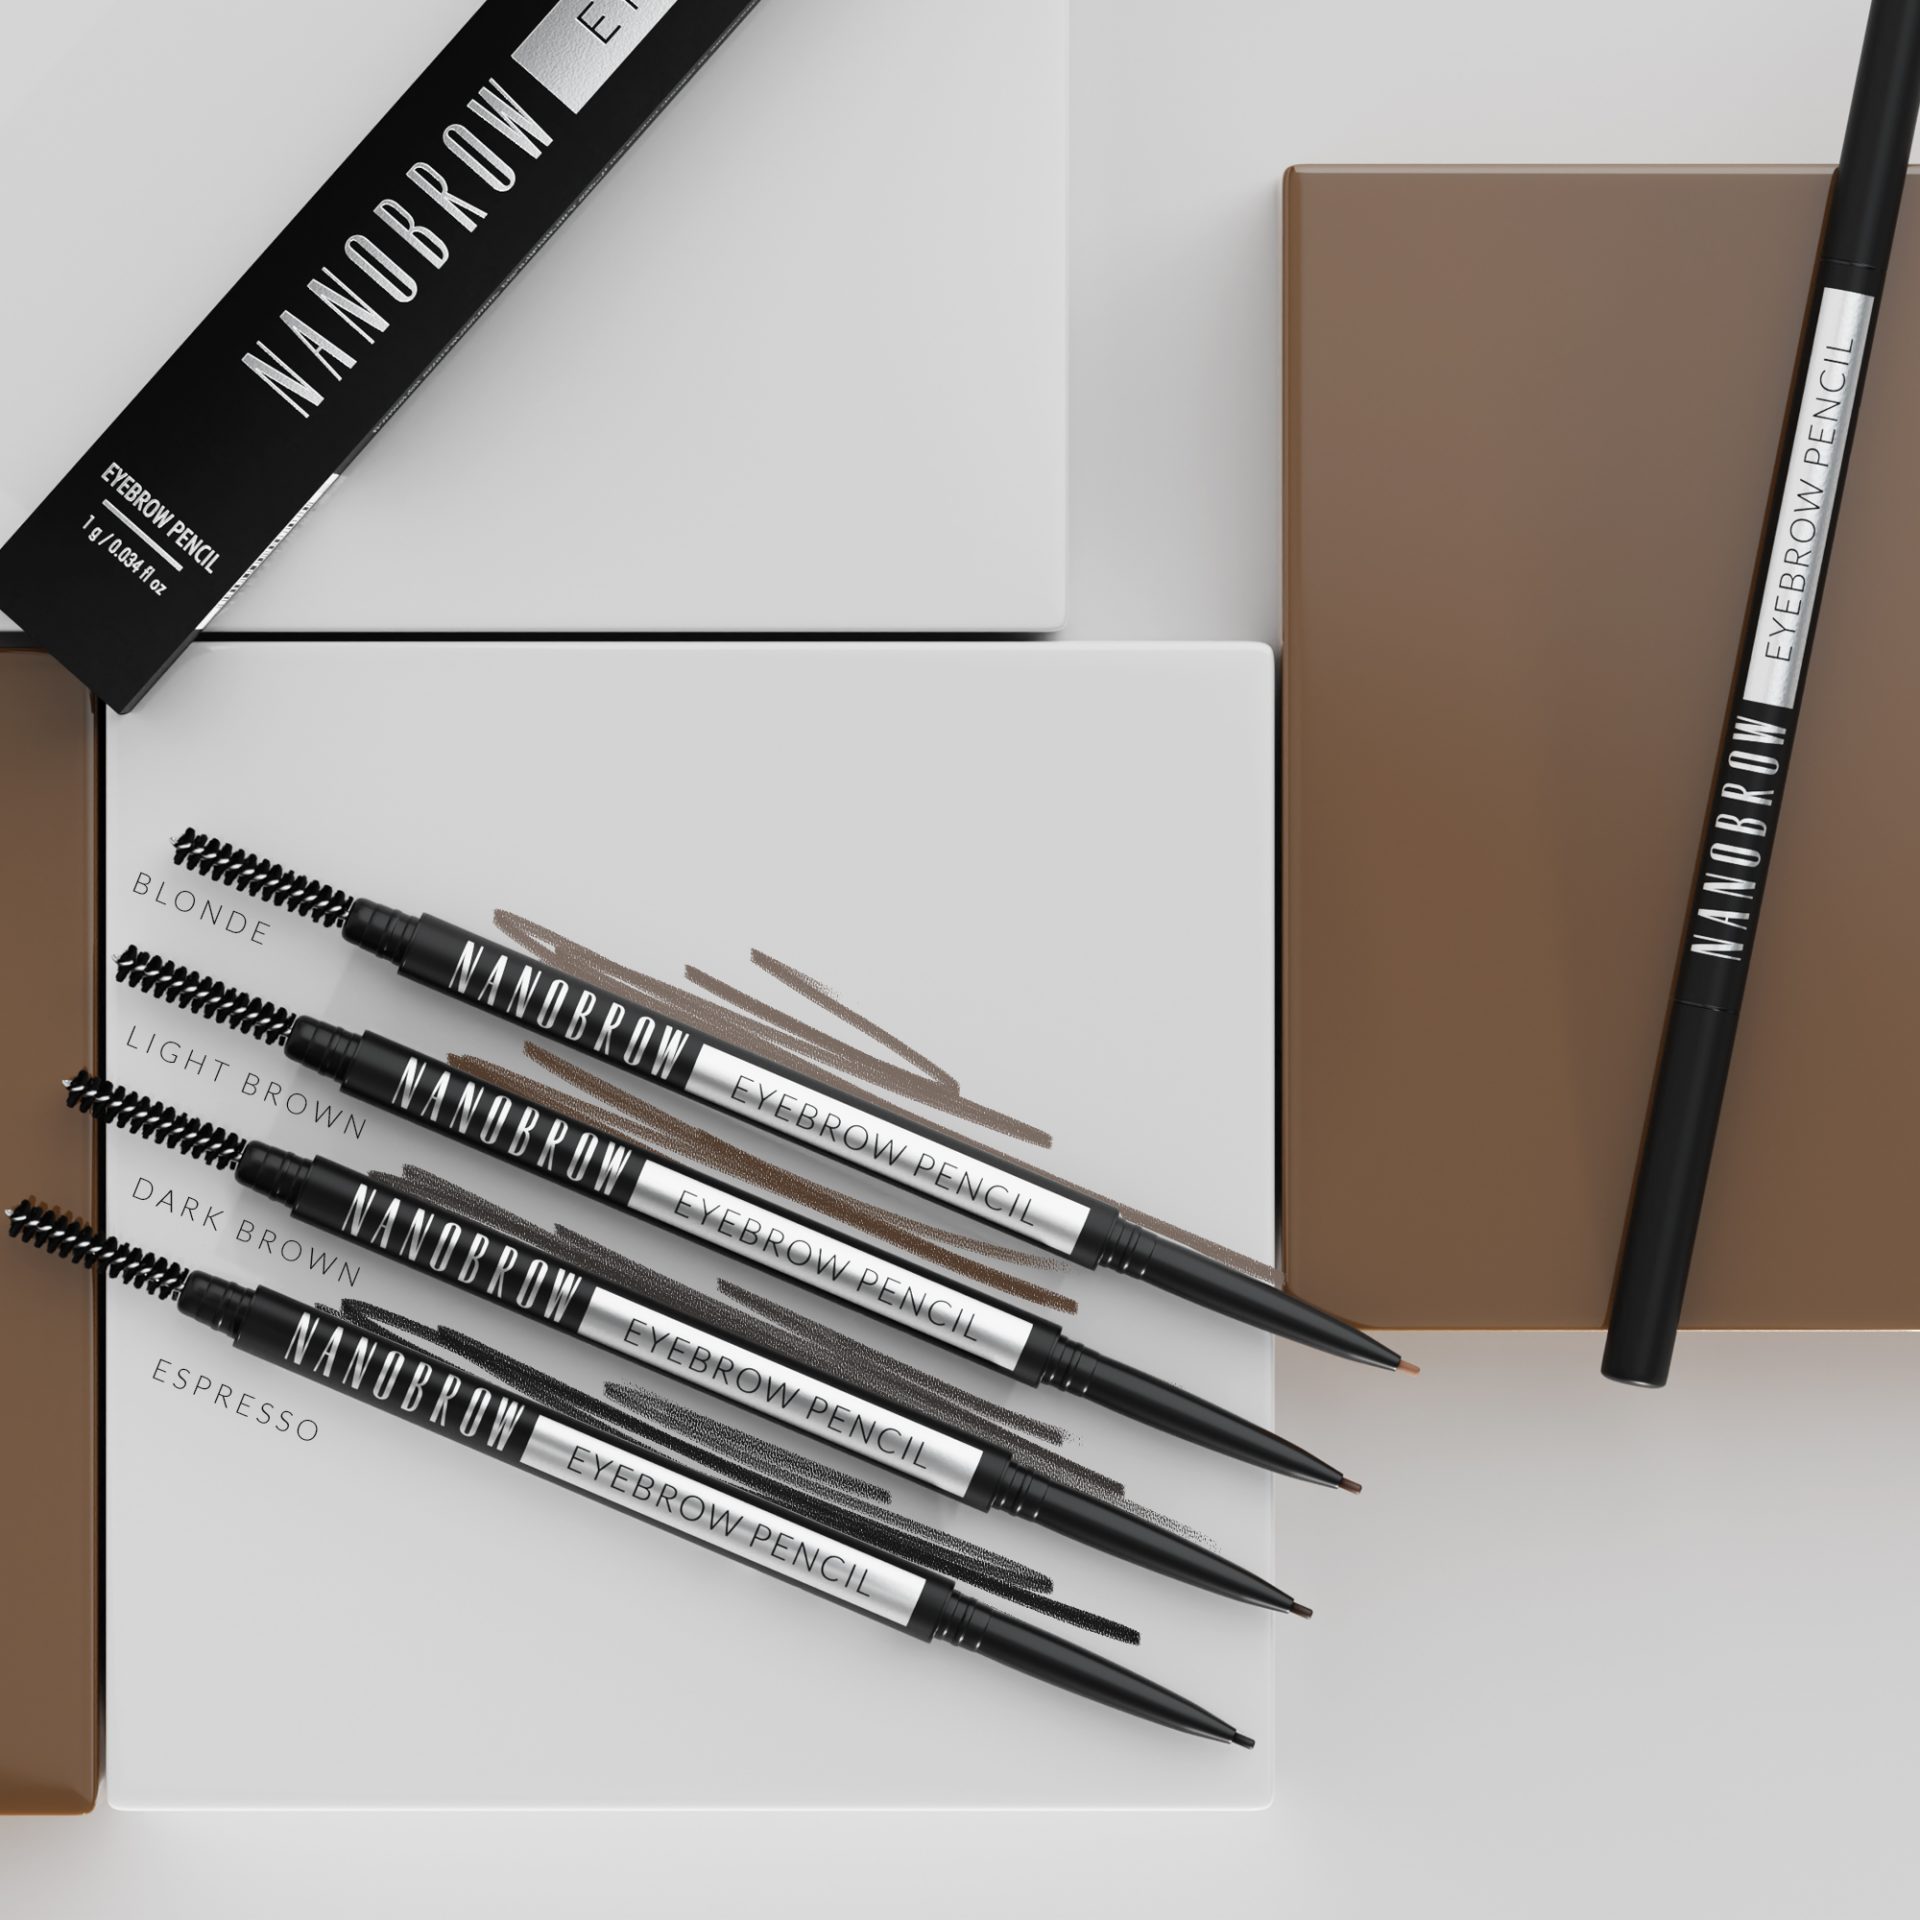 Testing Nanobrow Eyebrow Pencil – is this brow pencil truly the best?